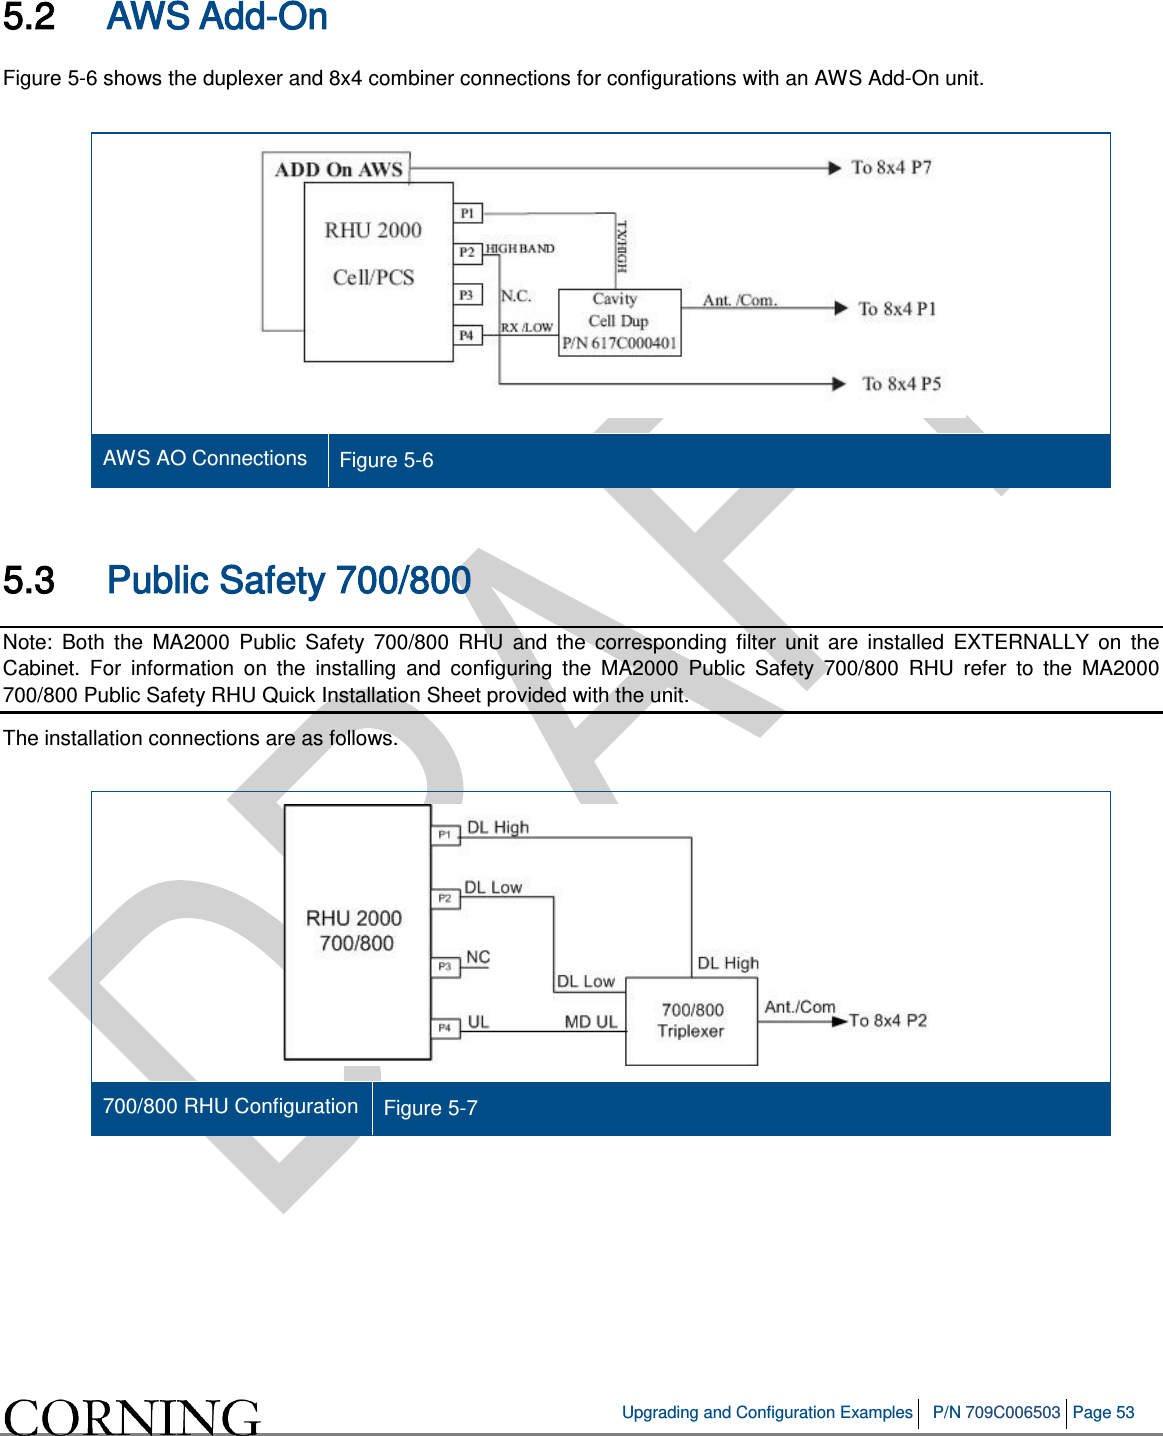   Upgrading and Configuration Examples P/N 709C006503 Page 53   5.2 AWS Add-On Figure  5-6 shows the duplexer and 8x4 combiner connections for configurations with an AWS Add-On unit.   AWS AO Connections Figure  5-6    5.3 Public Safety 700/800 Note: Both the MA2000 Public Safety 700/800 RHU and the corresponding filter unit are installed EXTERNALLY on the Cabinet. For information on the installing and configuring the MA2000 Public Safety 700/800 RHU refer to the MA2000 700/800 Public Safety RHU Quick Installation Sheet provided with the unit. The installation connections are as follows.   700/800 RHU Configuration Figure  5-7      